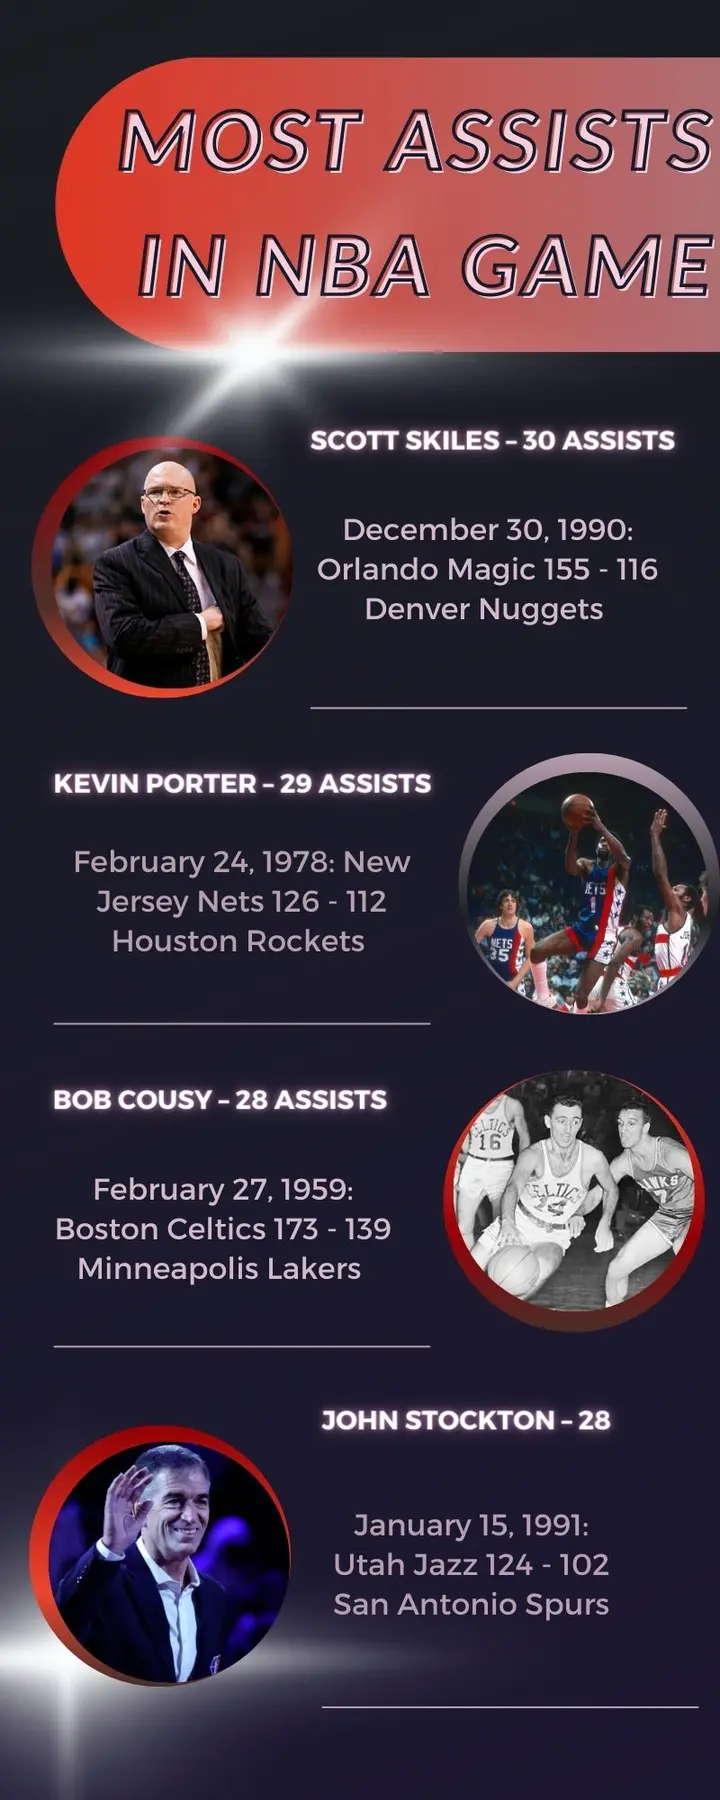 Most assists in NBA game